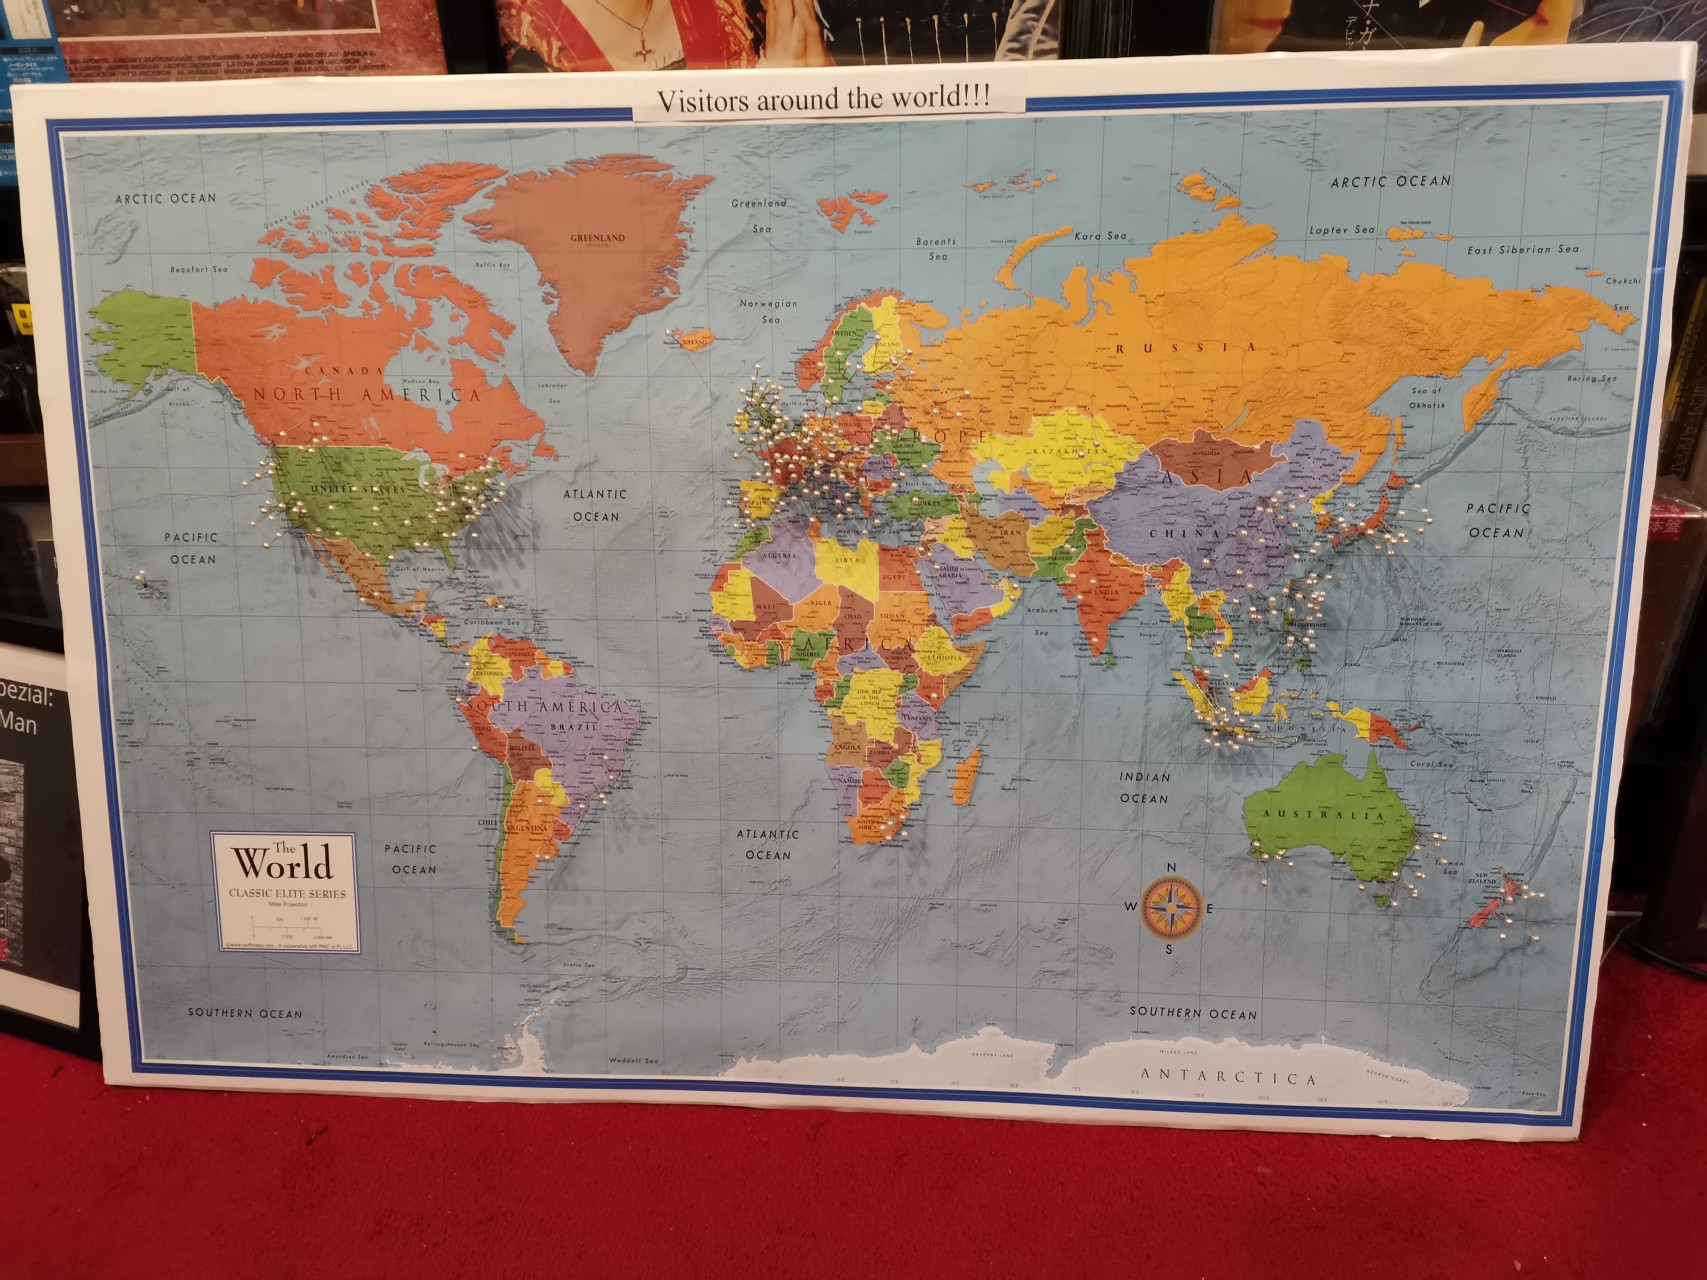 Over 100 countries visitors from around the world!